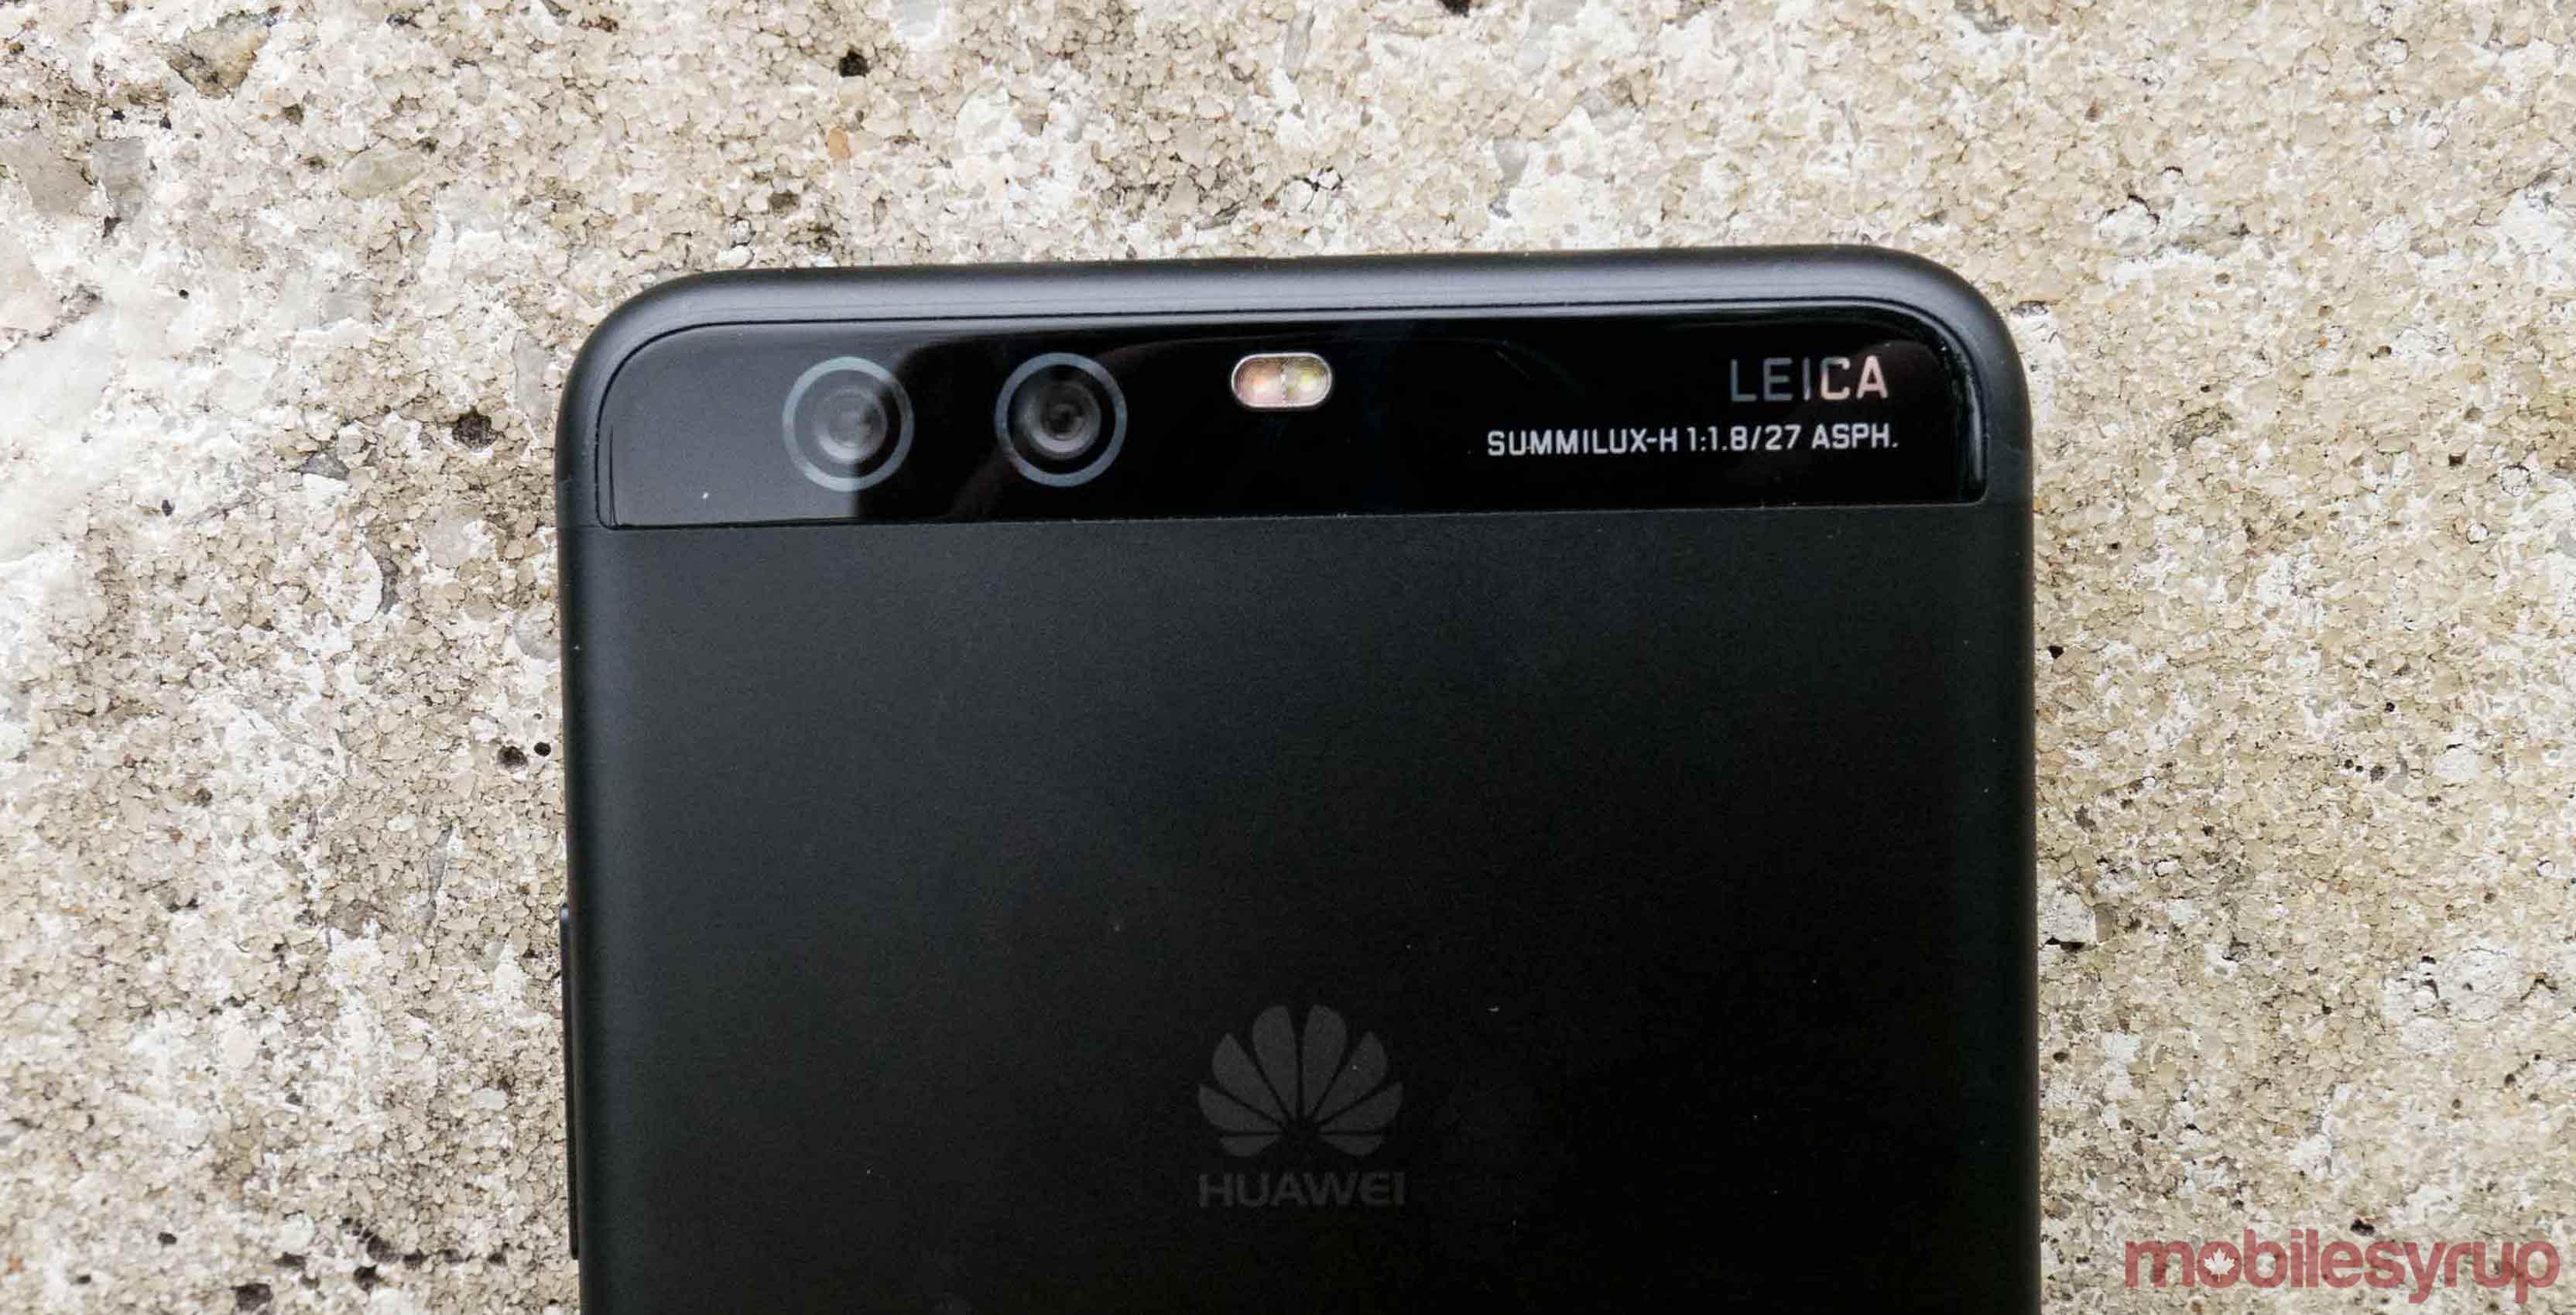 Image of the Huawei P10 Plus and its rear-facing camera array